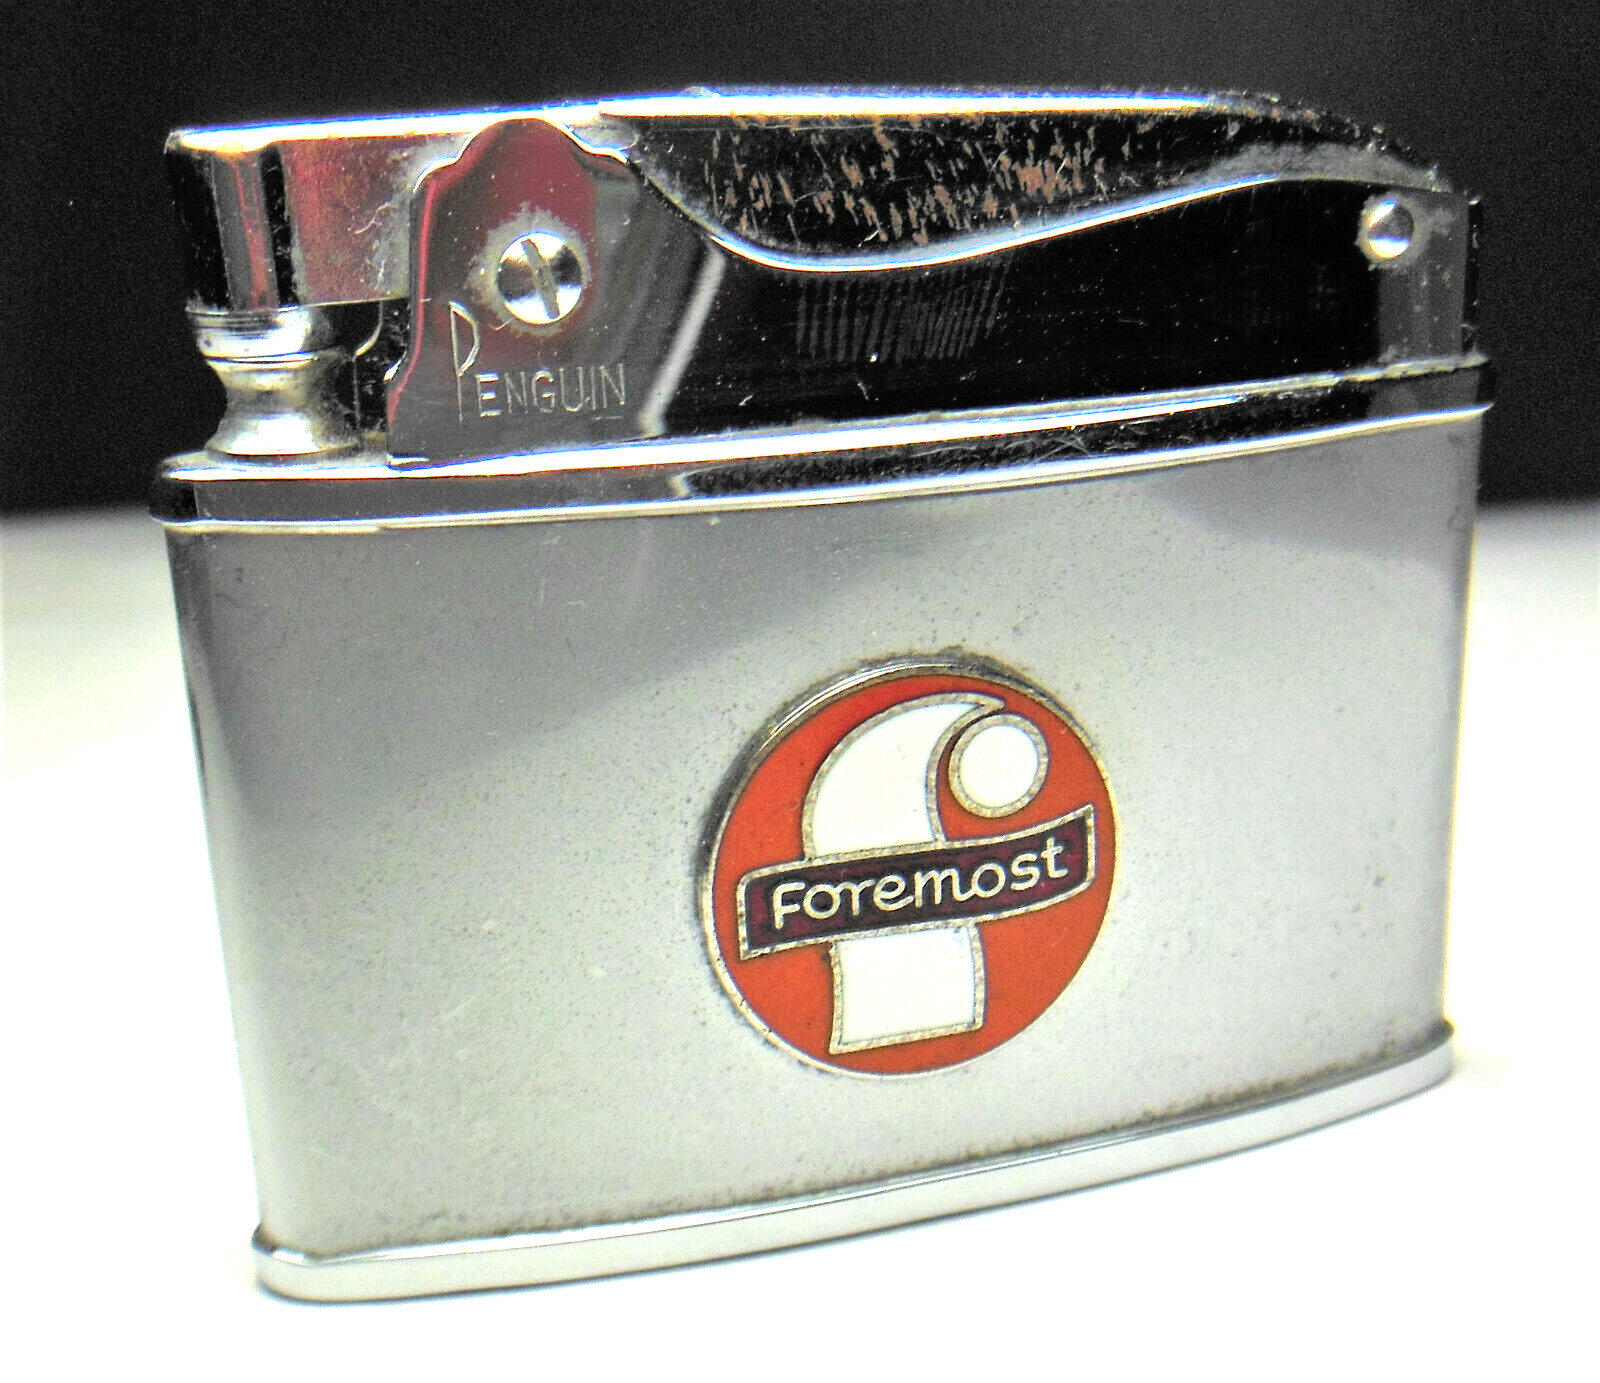 🍦 foremost Dairy Co. emblem employee service award flat lighter by PENGUIN